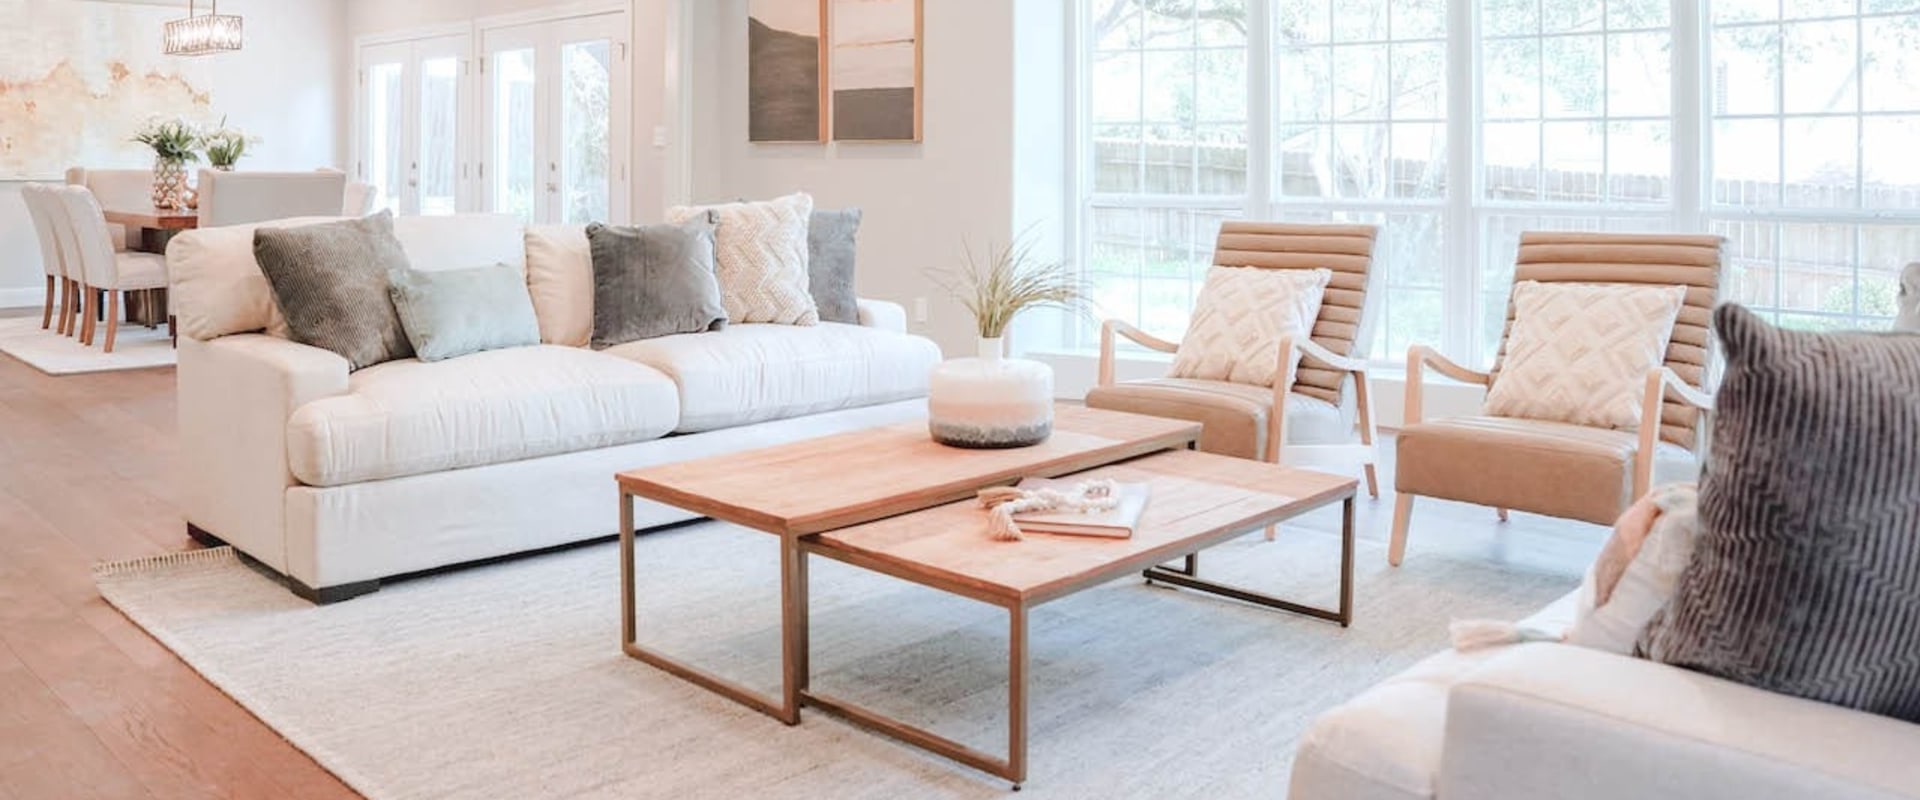 Can you buy home staging furniture?